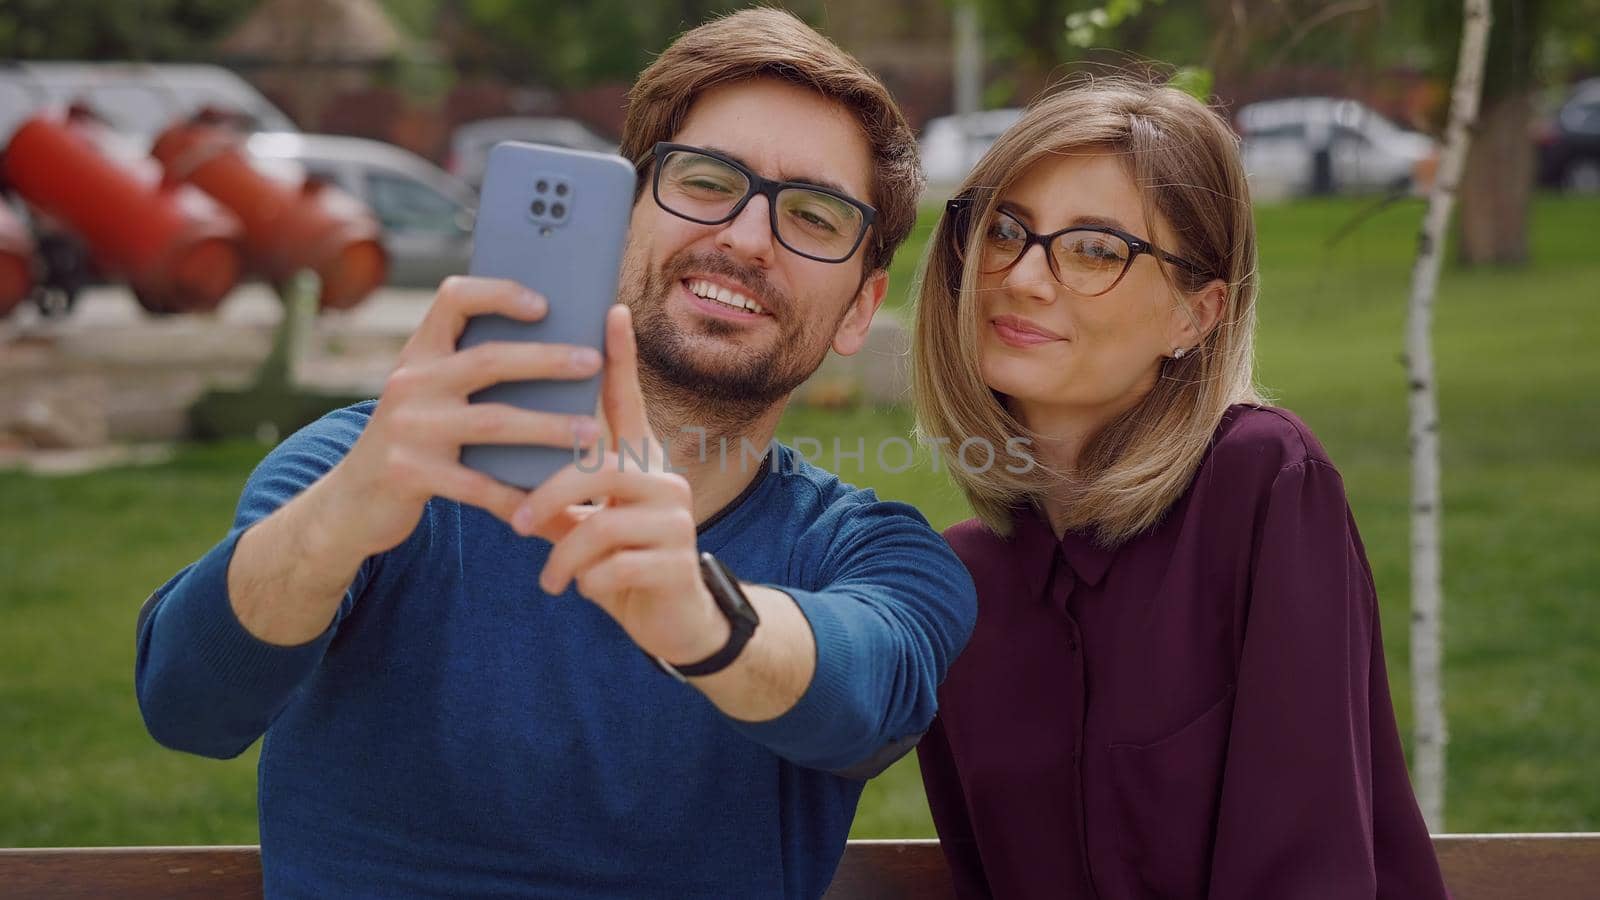 Friends woman and man close up ,wearing glasses take selfie with phone, feel happy smiling. Social networking outdoors. Friendship portrait concept.